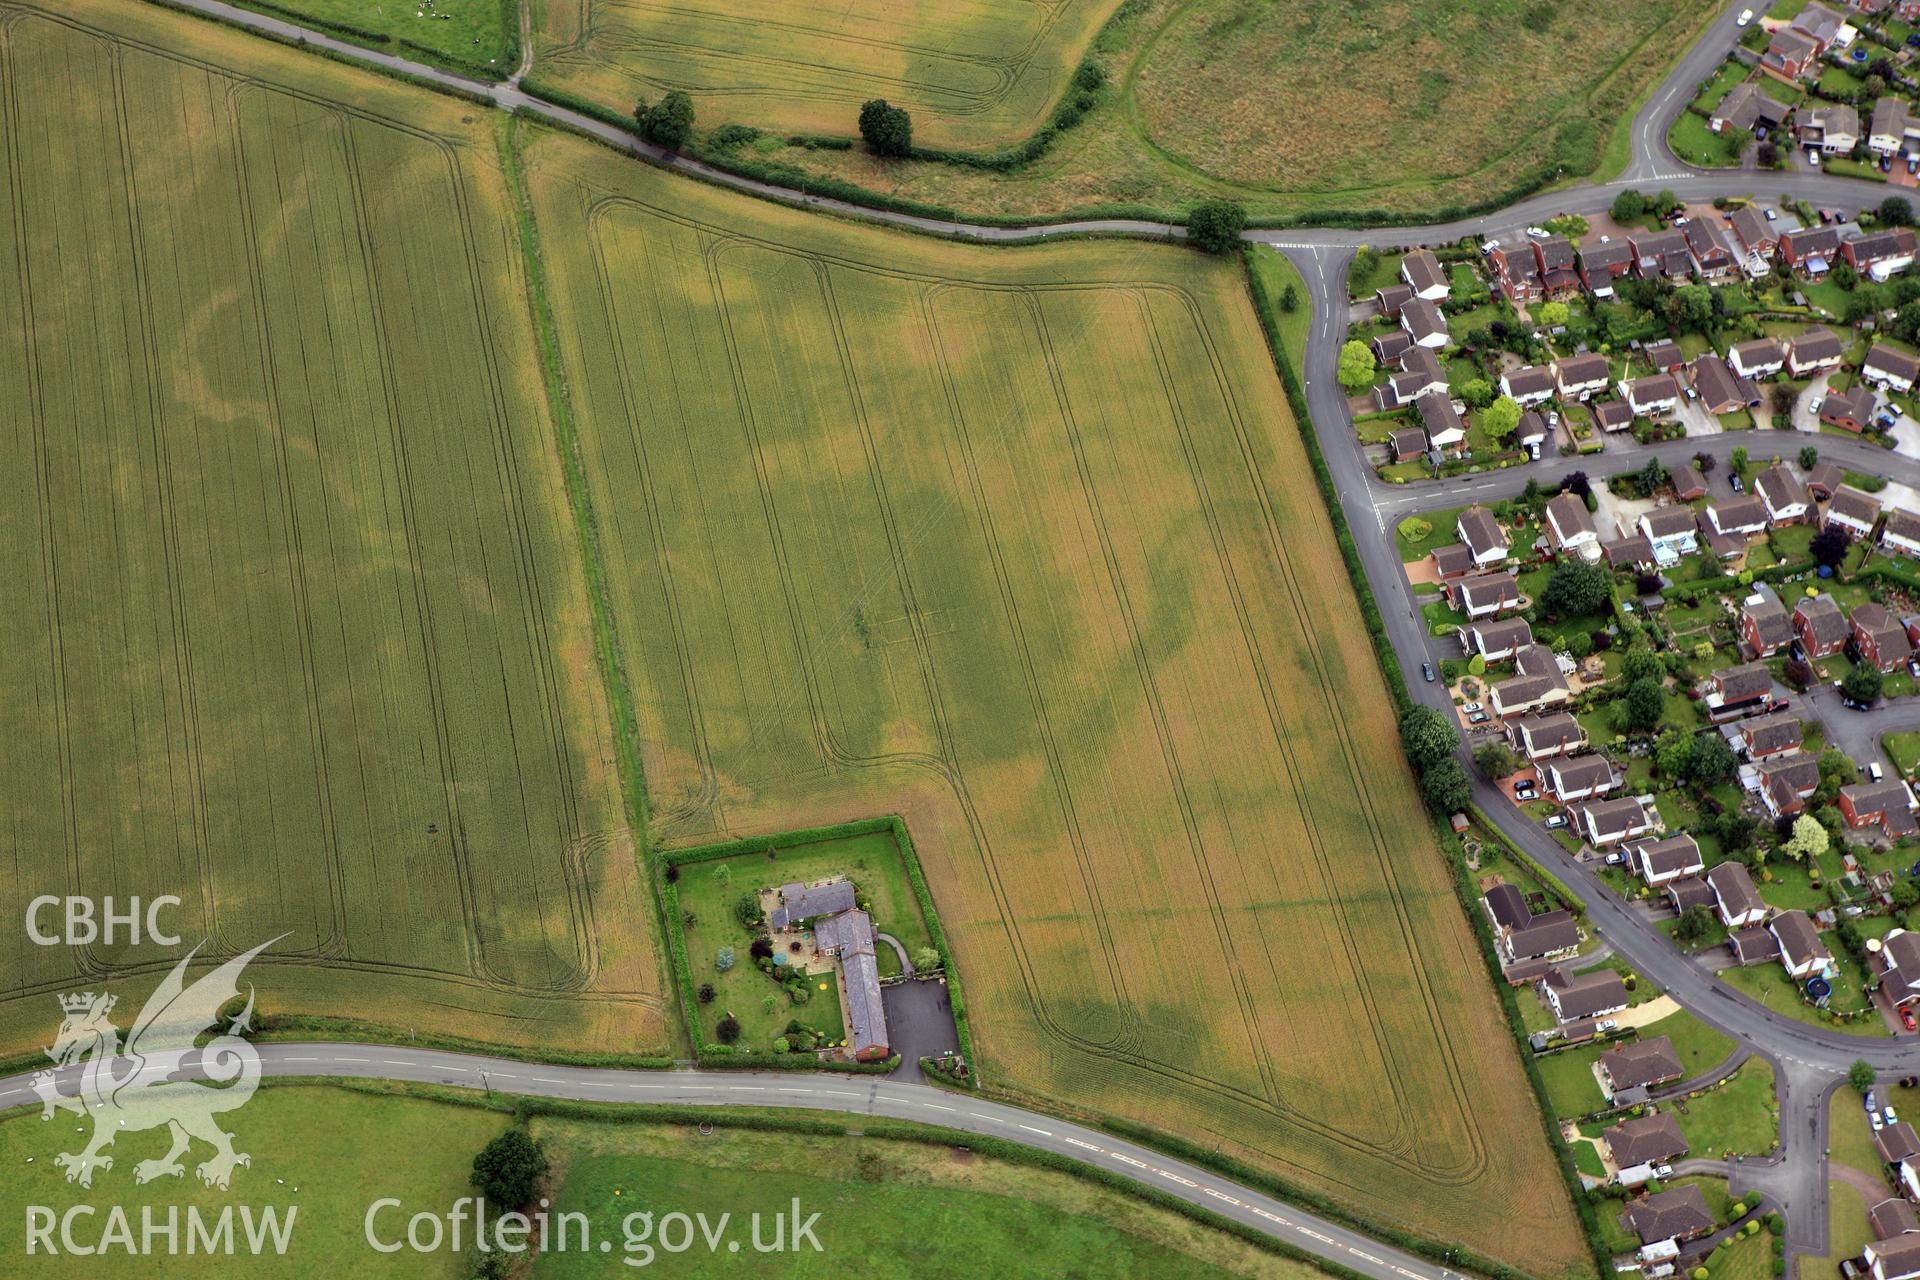 RCAHMW colour oblique aerial photograph of rectangular building cropmarks at Lane Farm. Taken on 08 July 2009 by Toby Driver